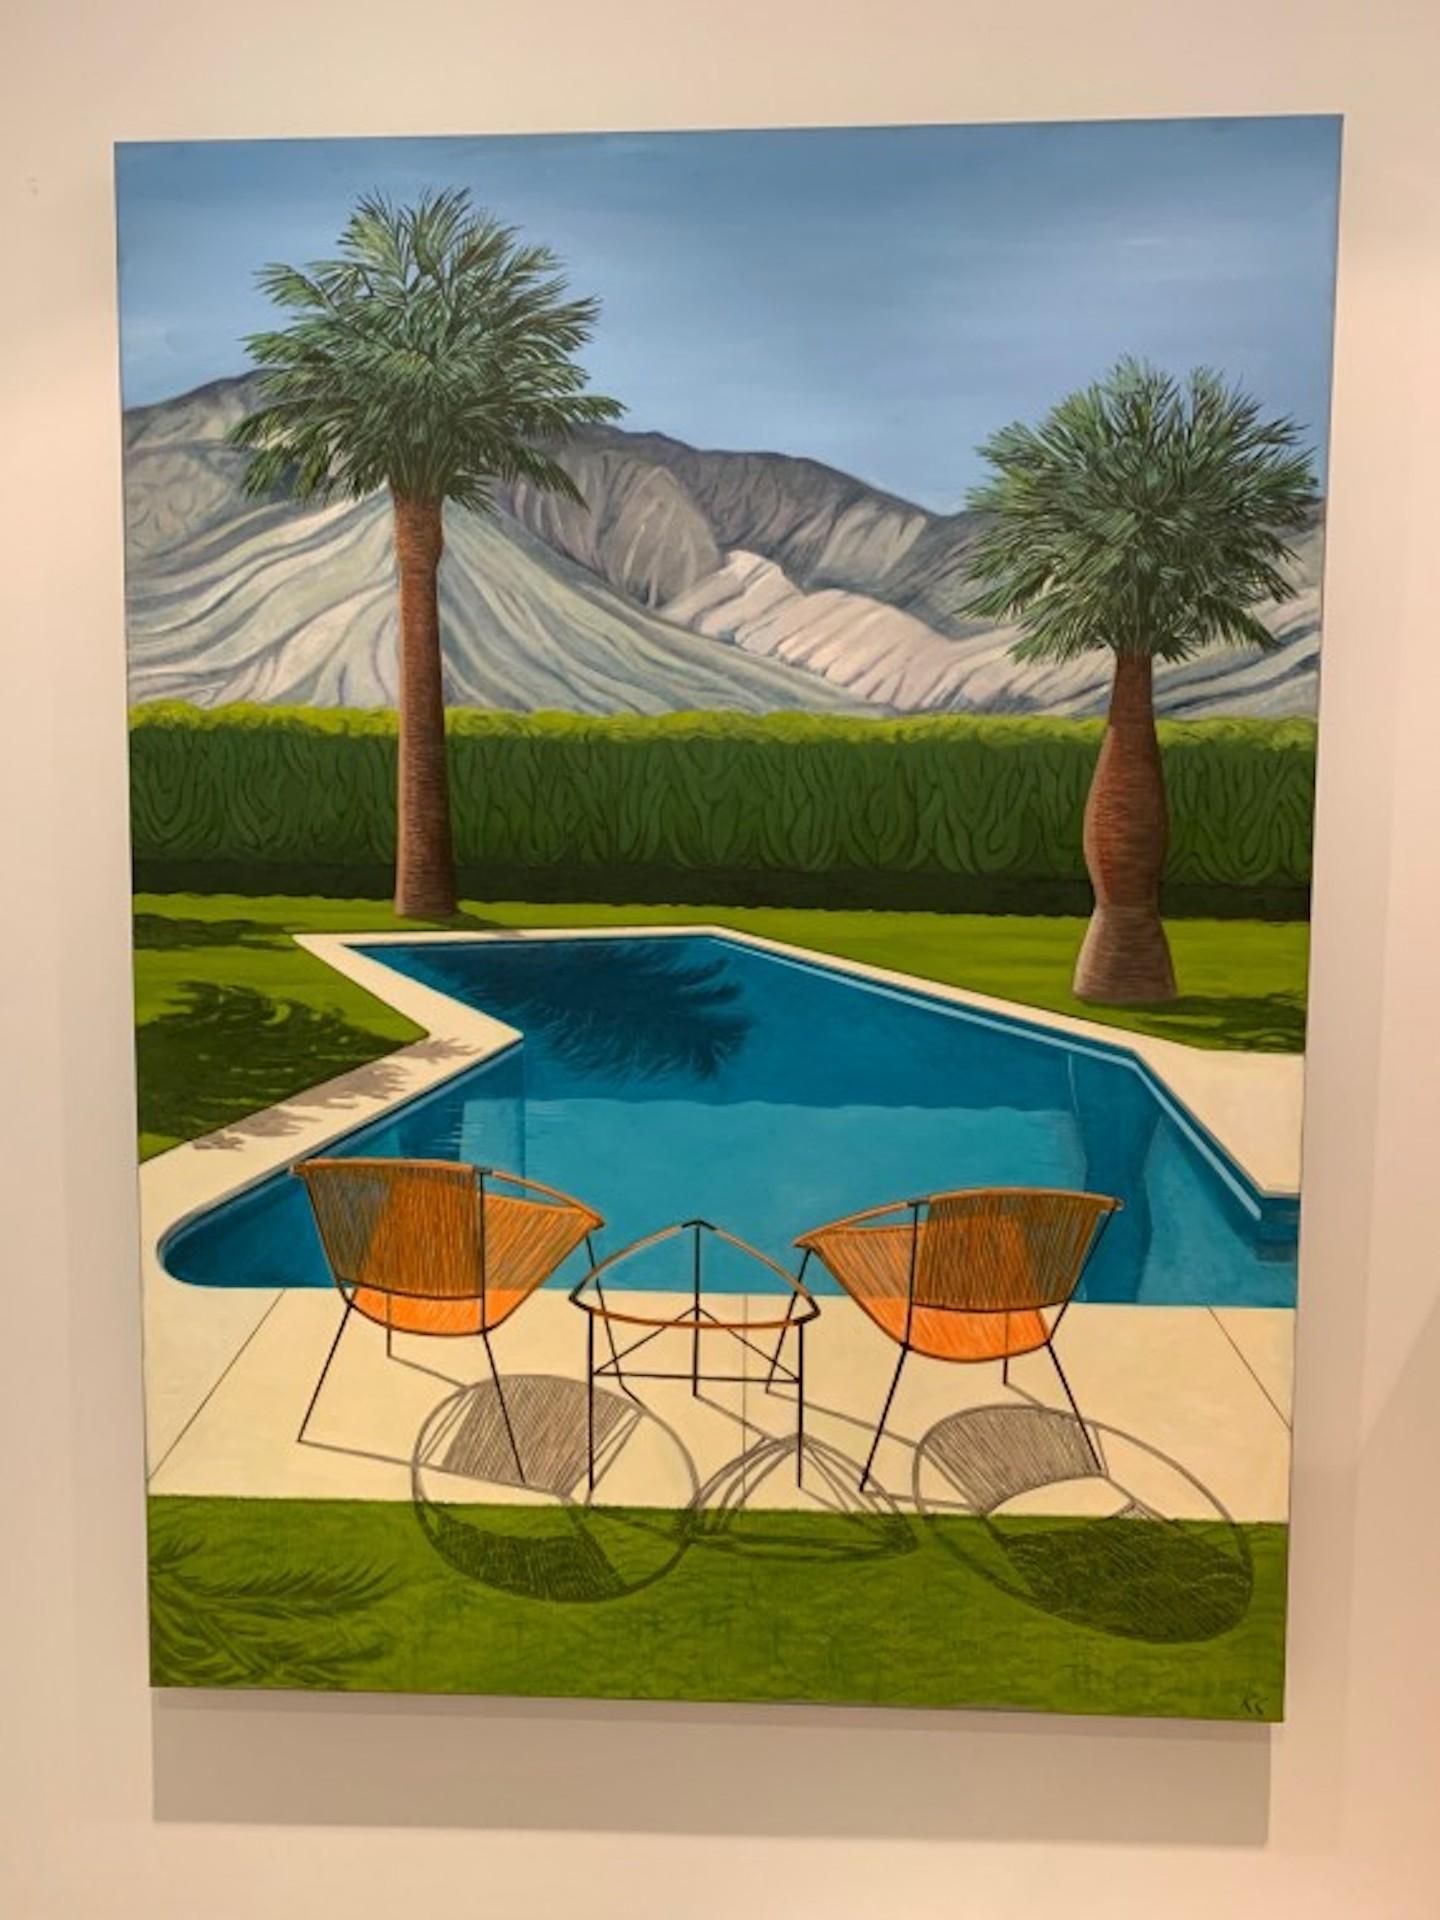 Come And Sit By The Pool, Karen Lynn, Original Painting, Affordable Art, Pool 2